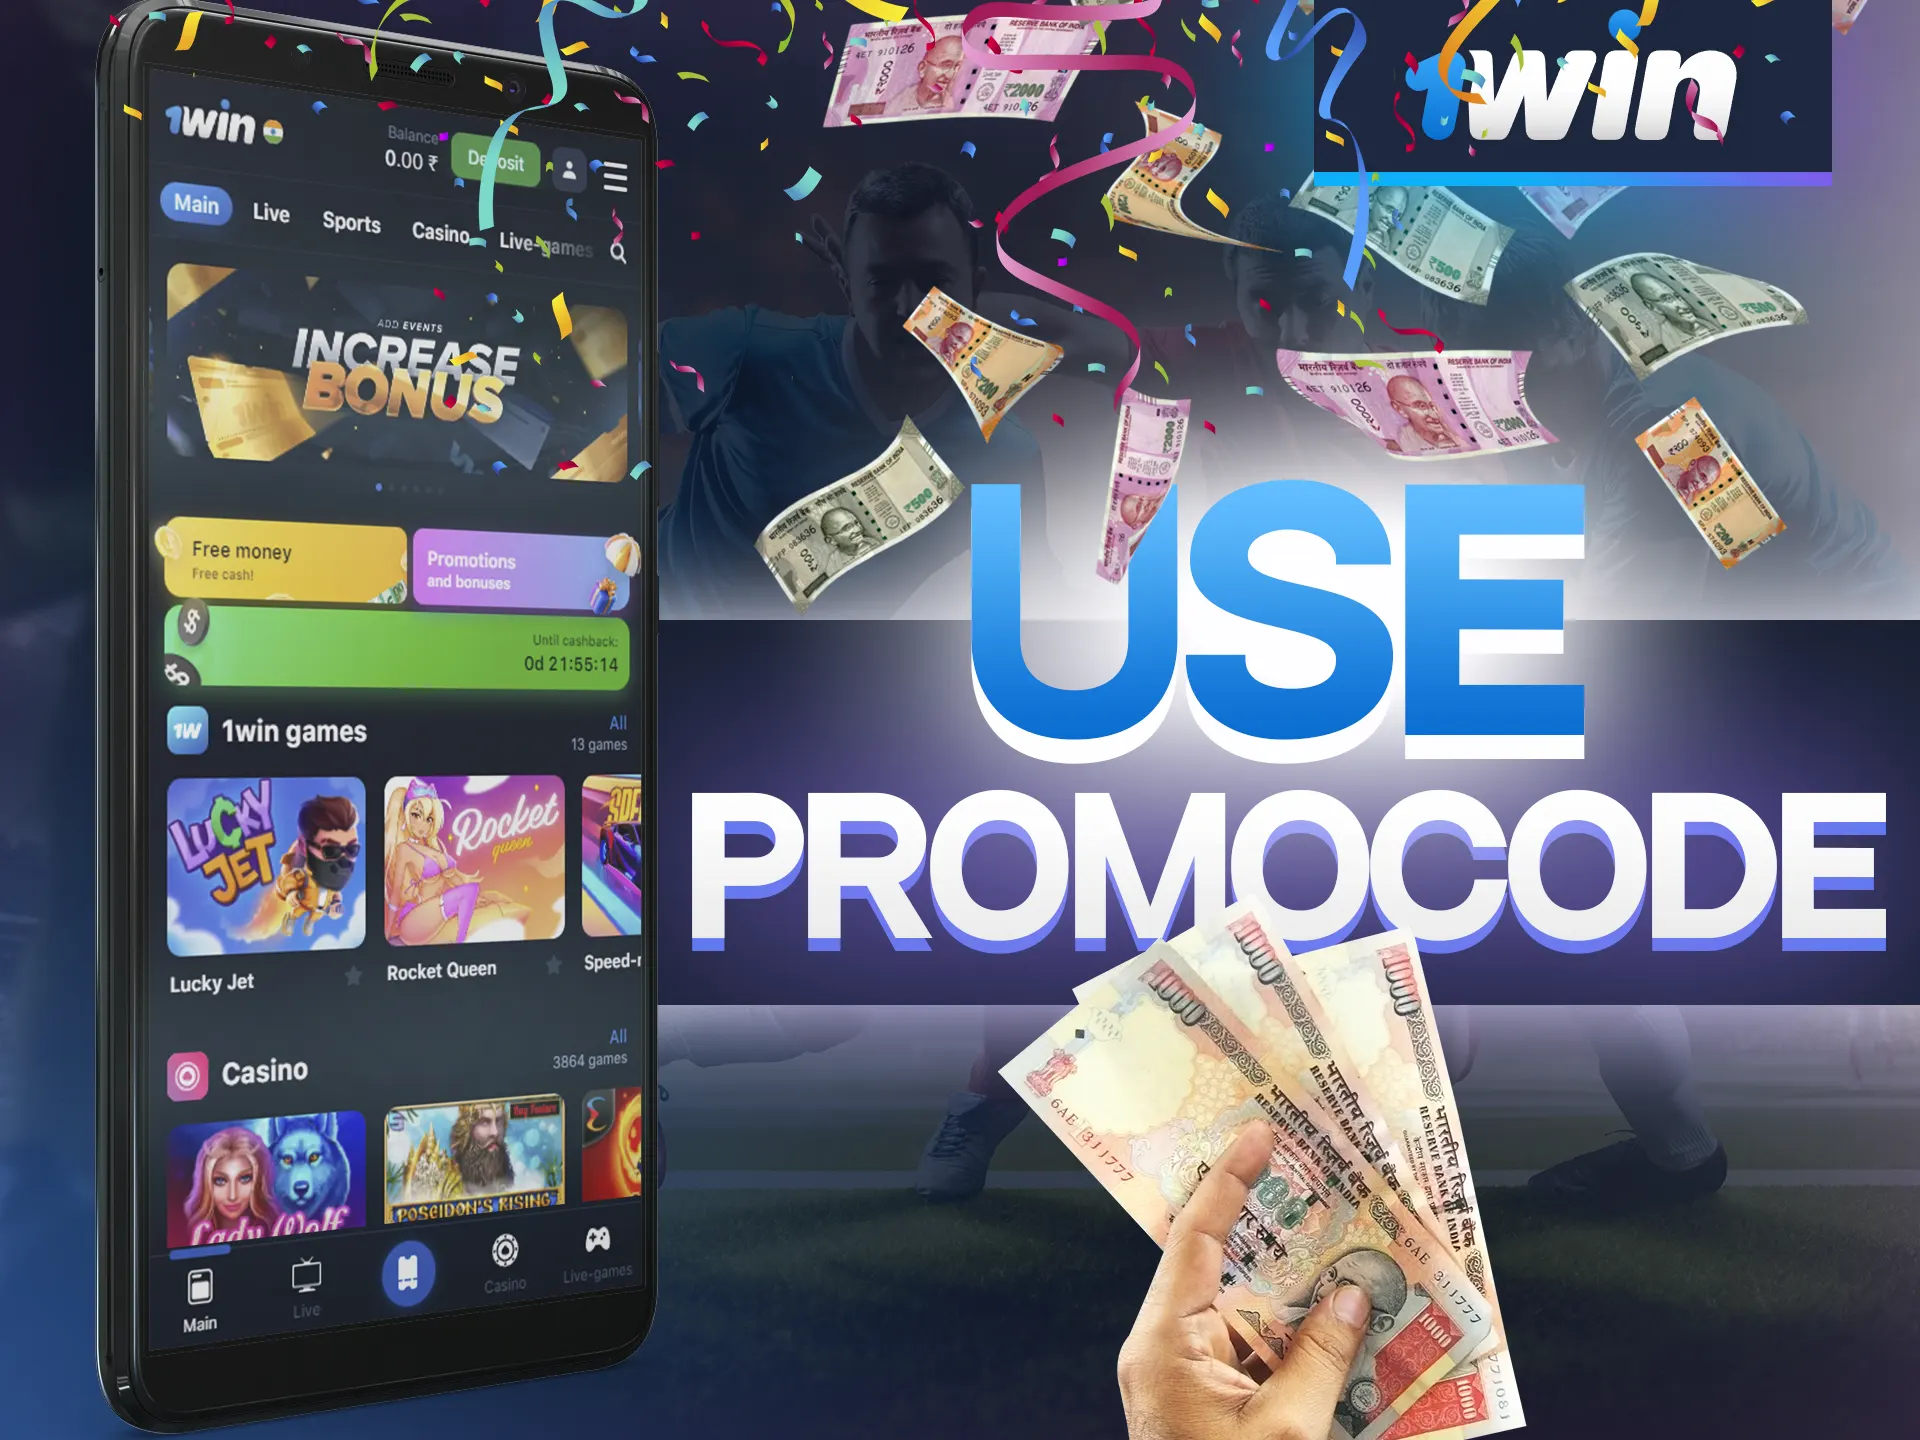 In the 1Win app, don't forget to use a beneficial promo code.